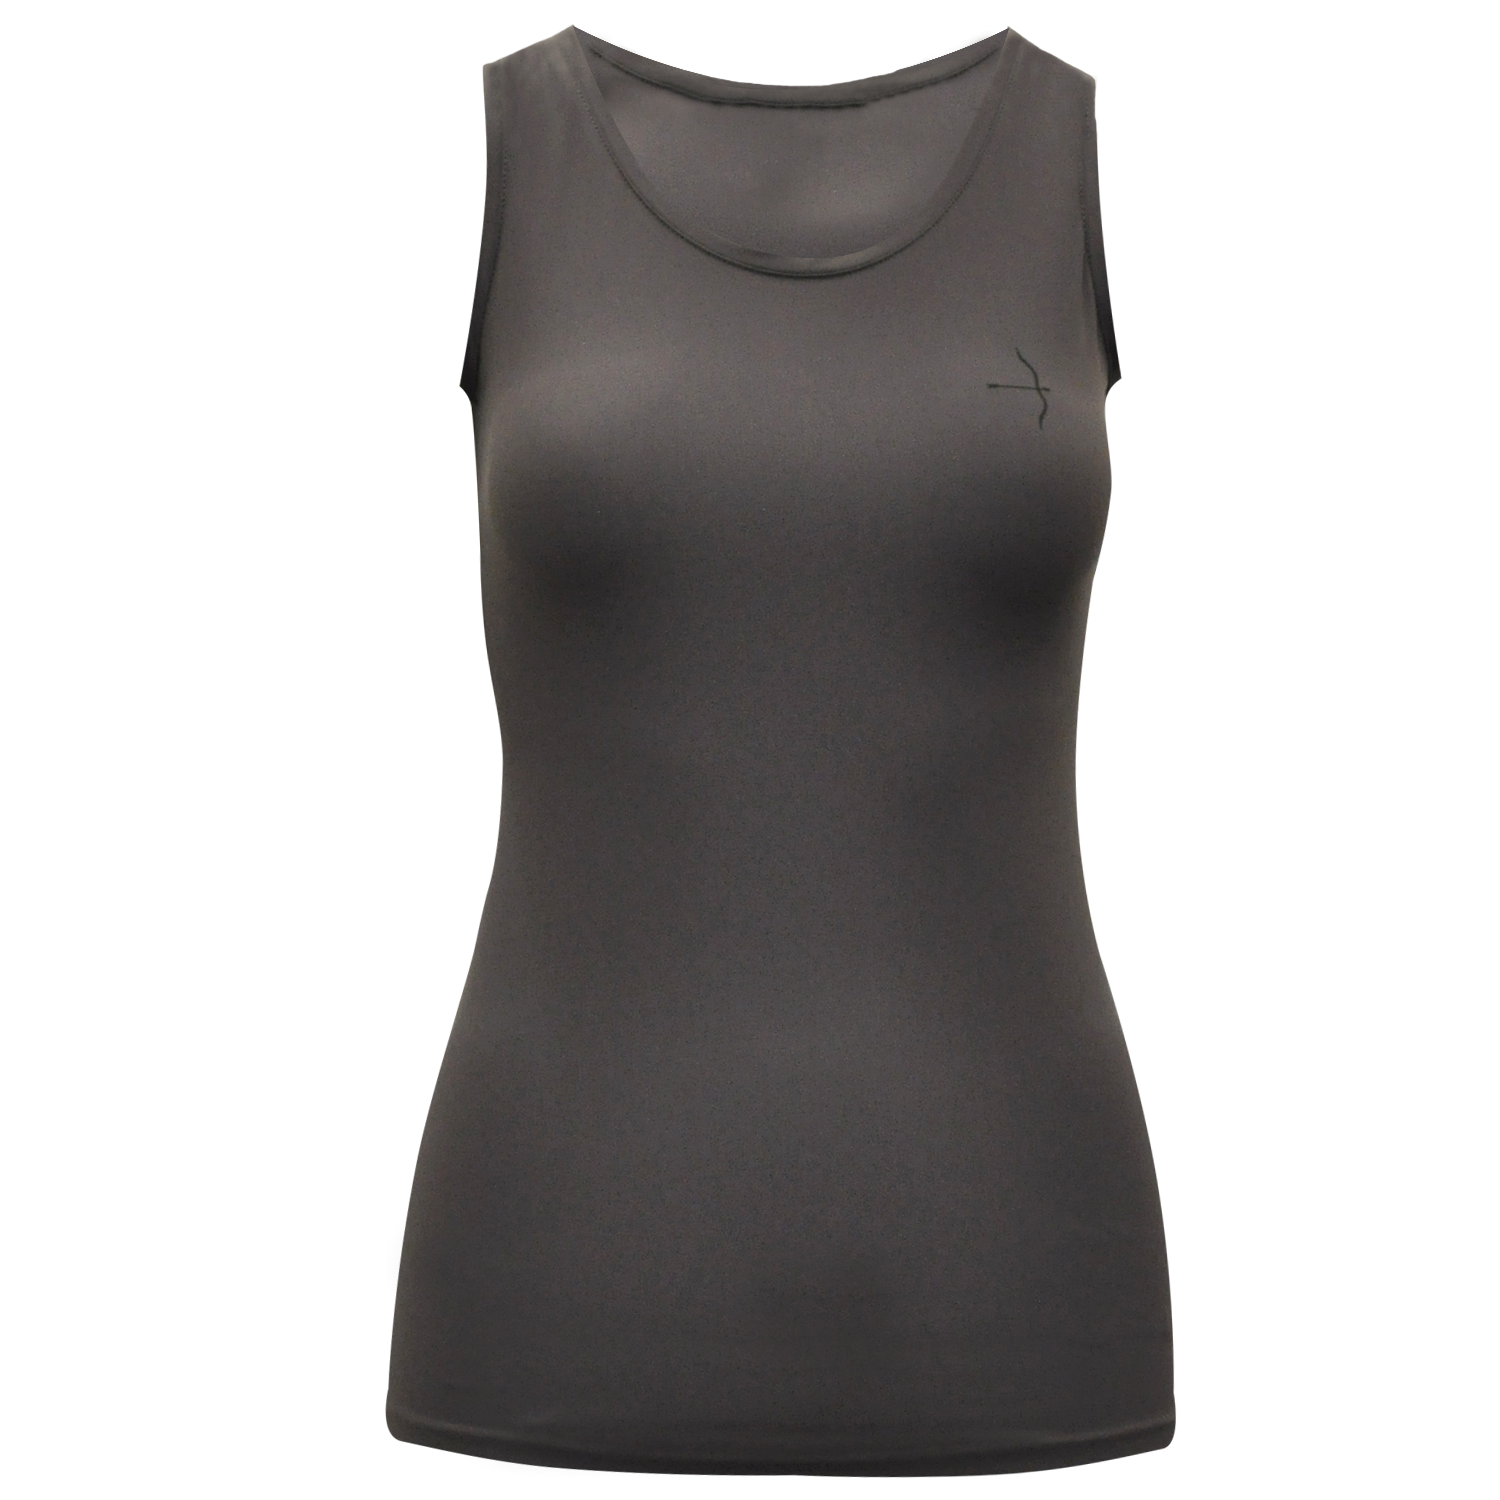 Reduced! Laguso Grey Training Vest Top